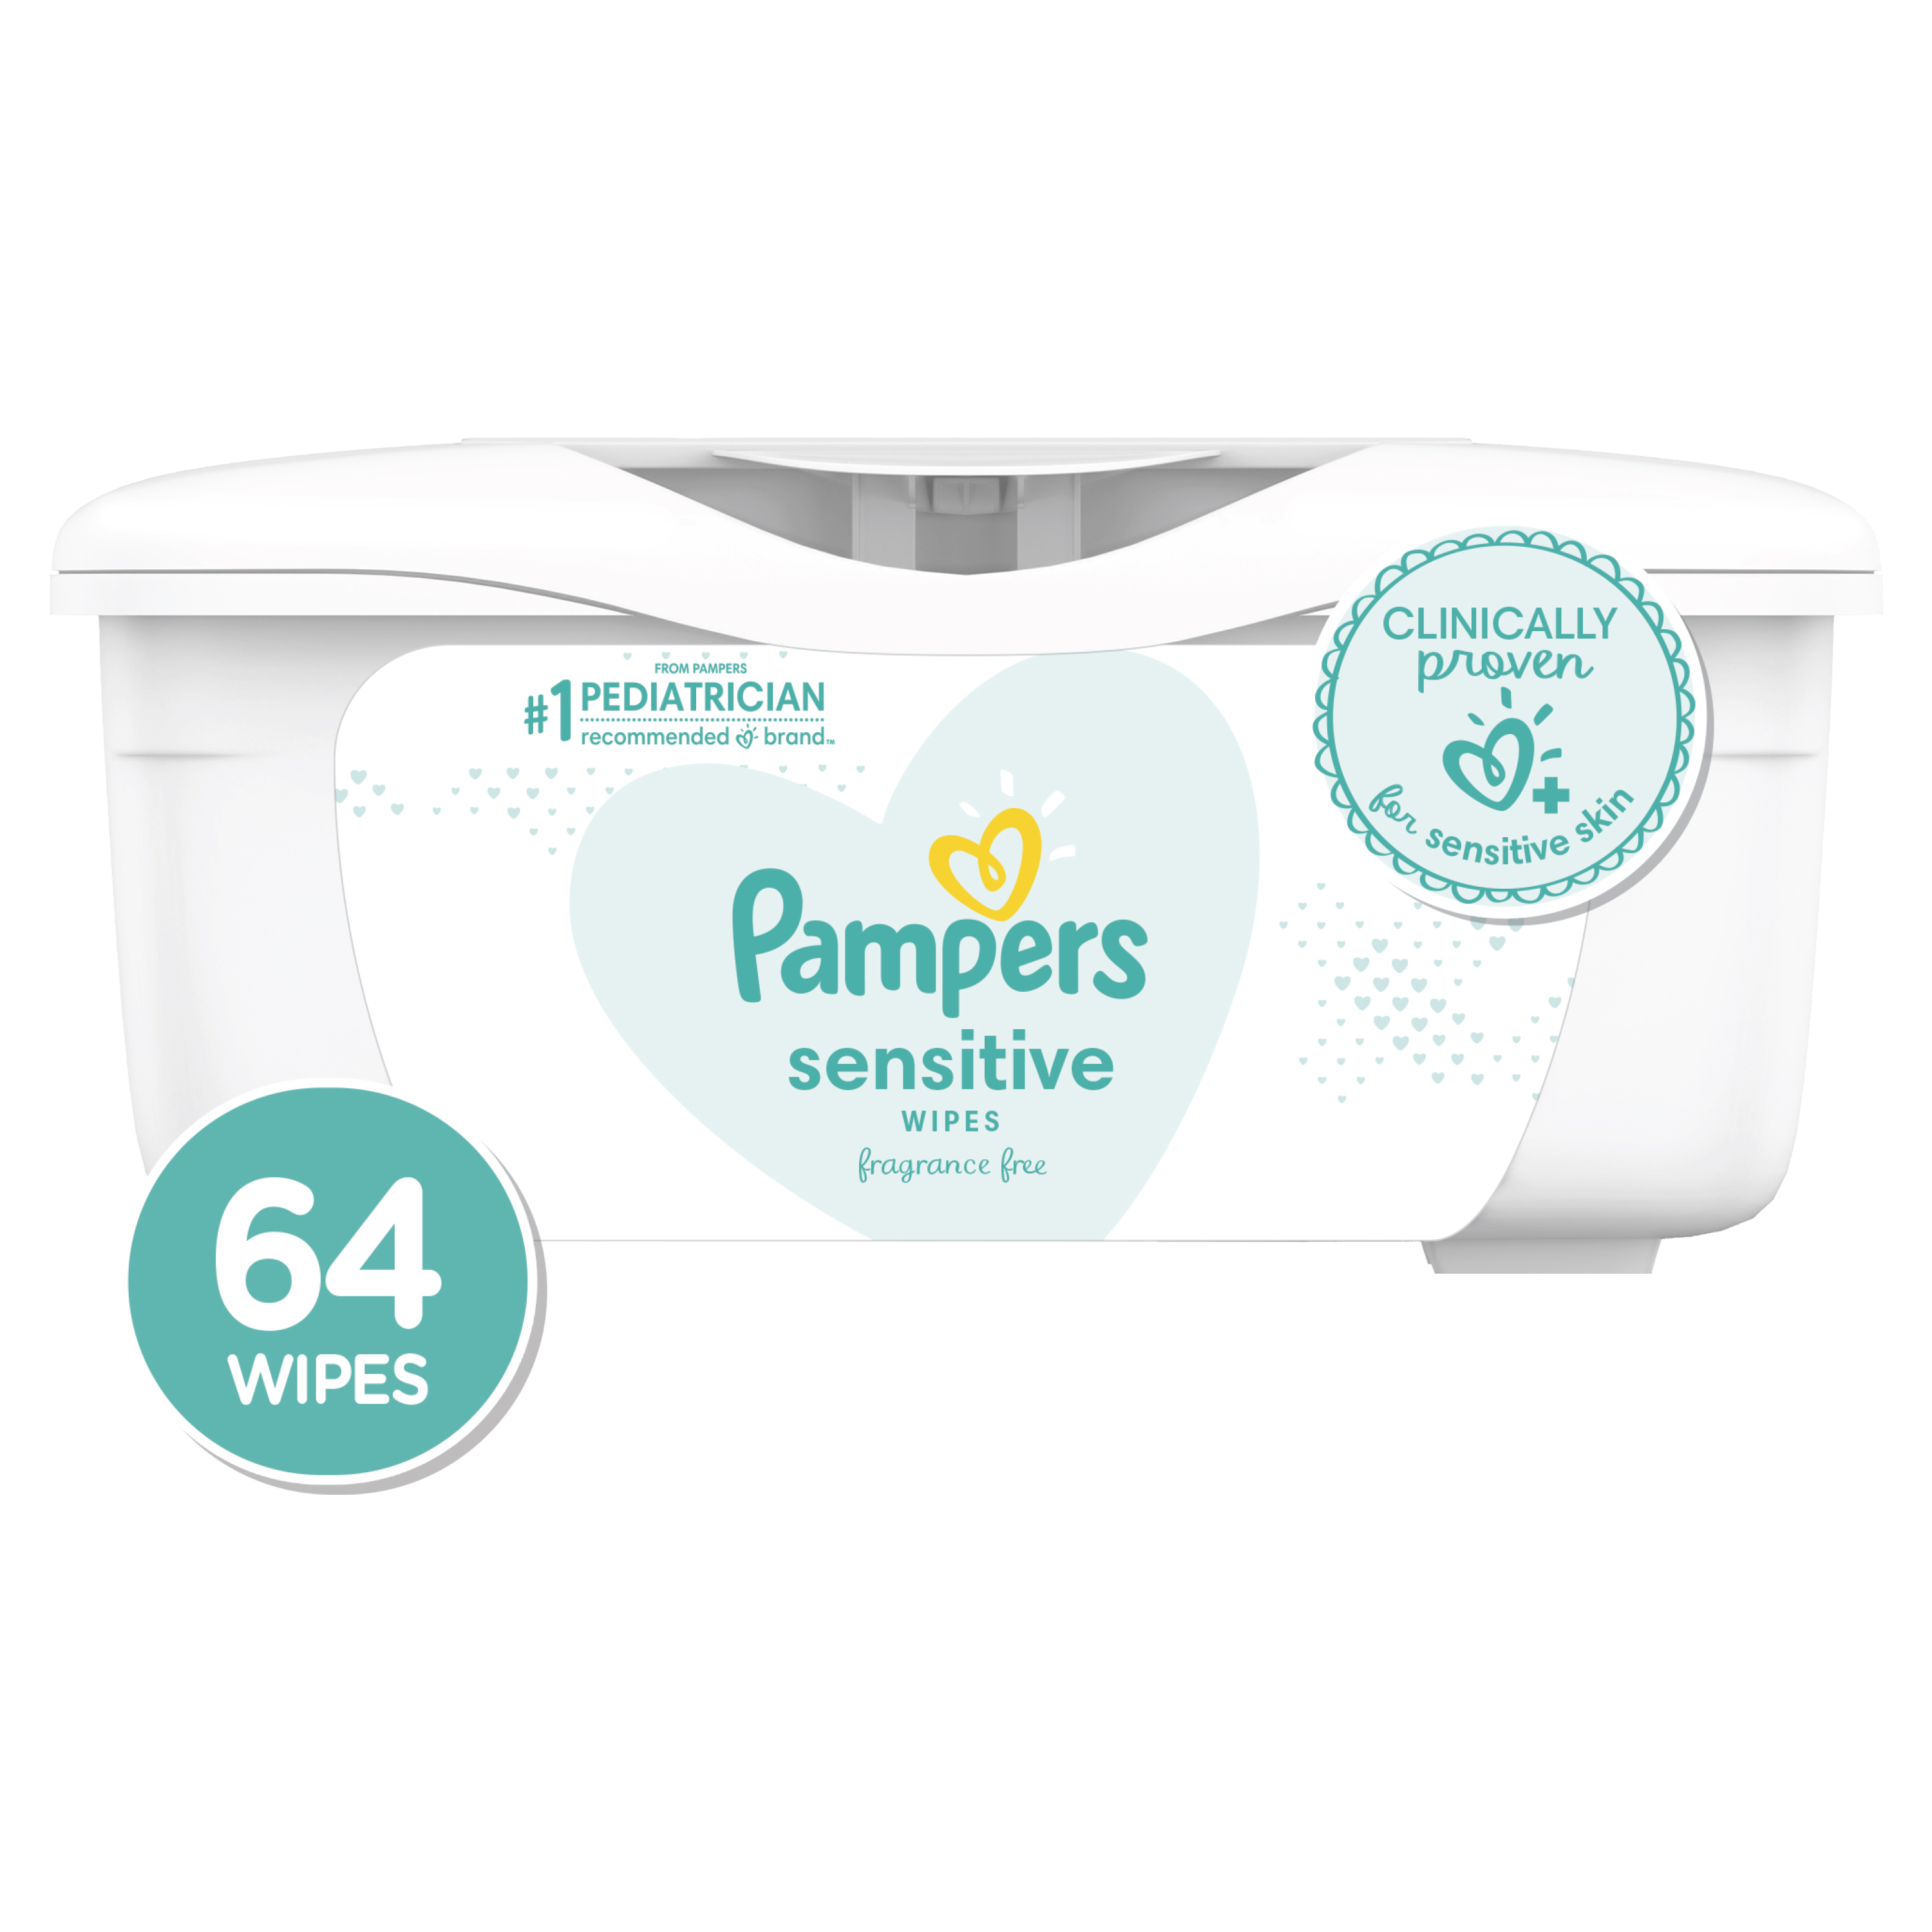 Pampers Baby Wipes Sensitive Perfume Free Tub, 64 Count - image 1 of 3